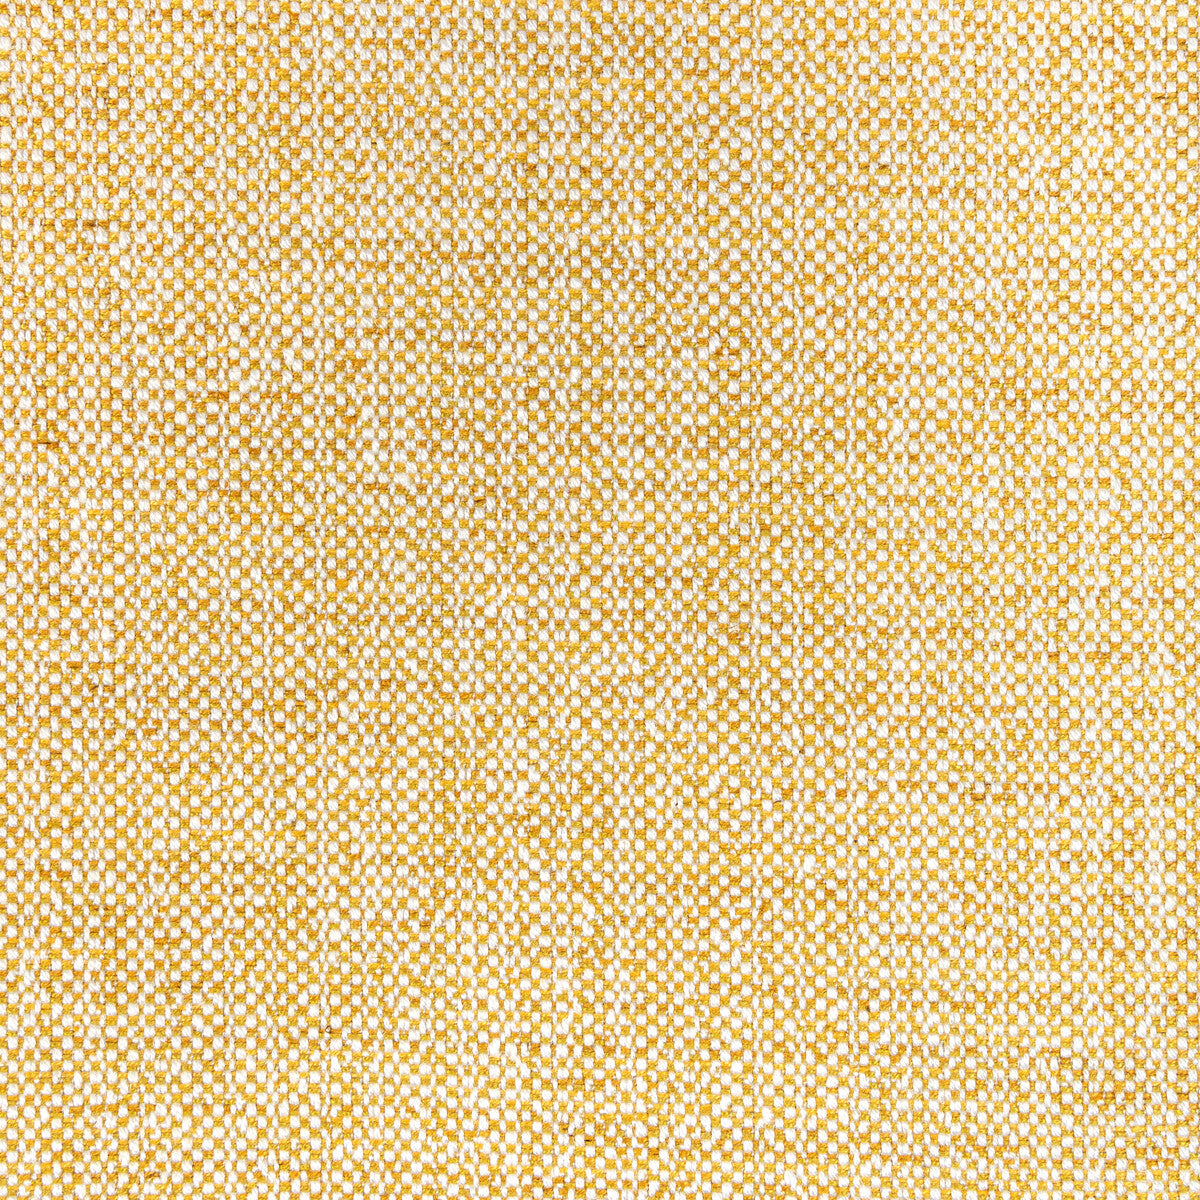 Rospico Plain fabric in canary color - pattern 8022110.4.0 - by Brunschwig &amp; Fils in the Lorient Weaves collection